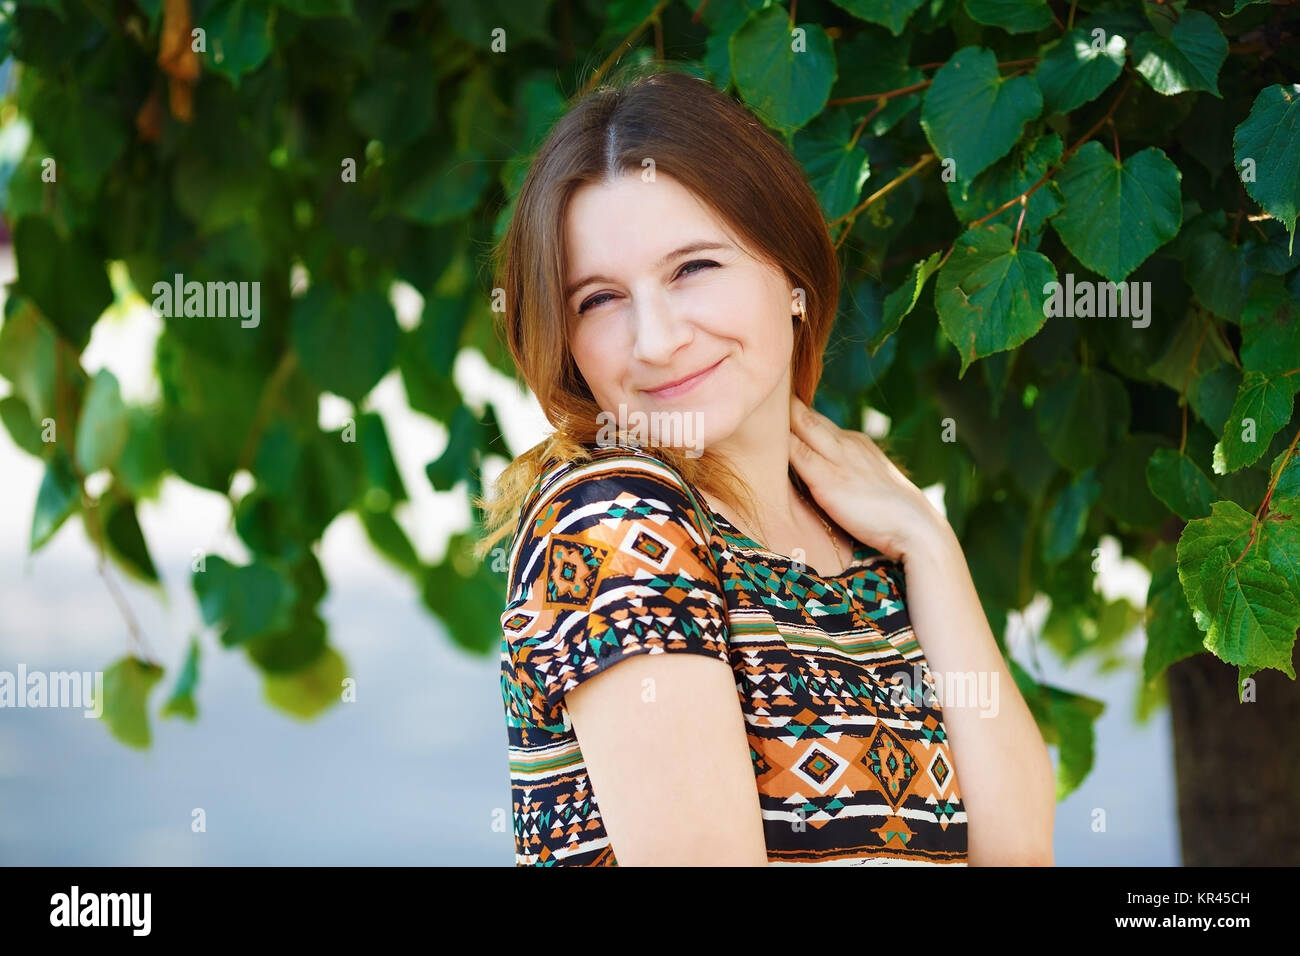 Attractive smiling woman Stock Photo